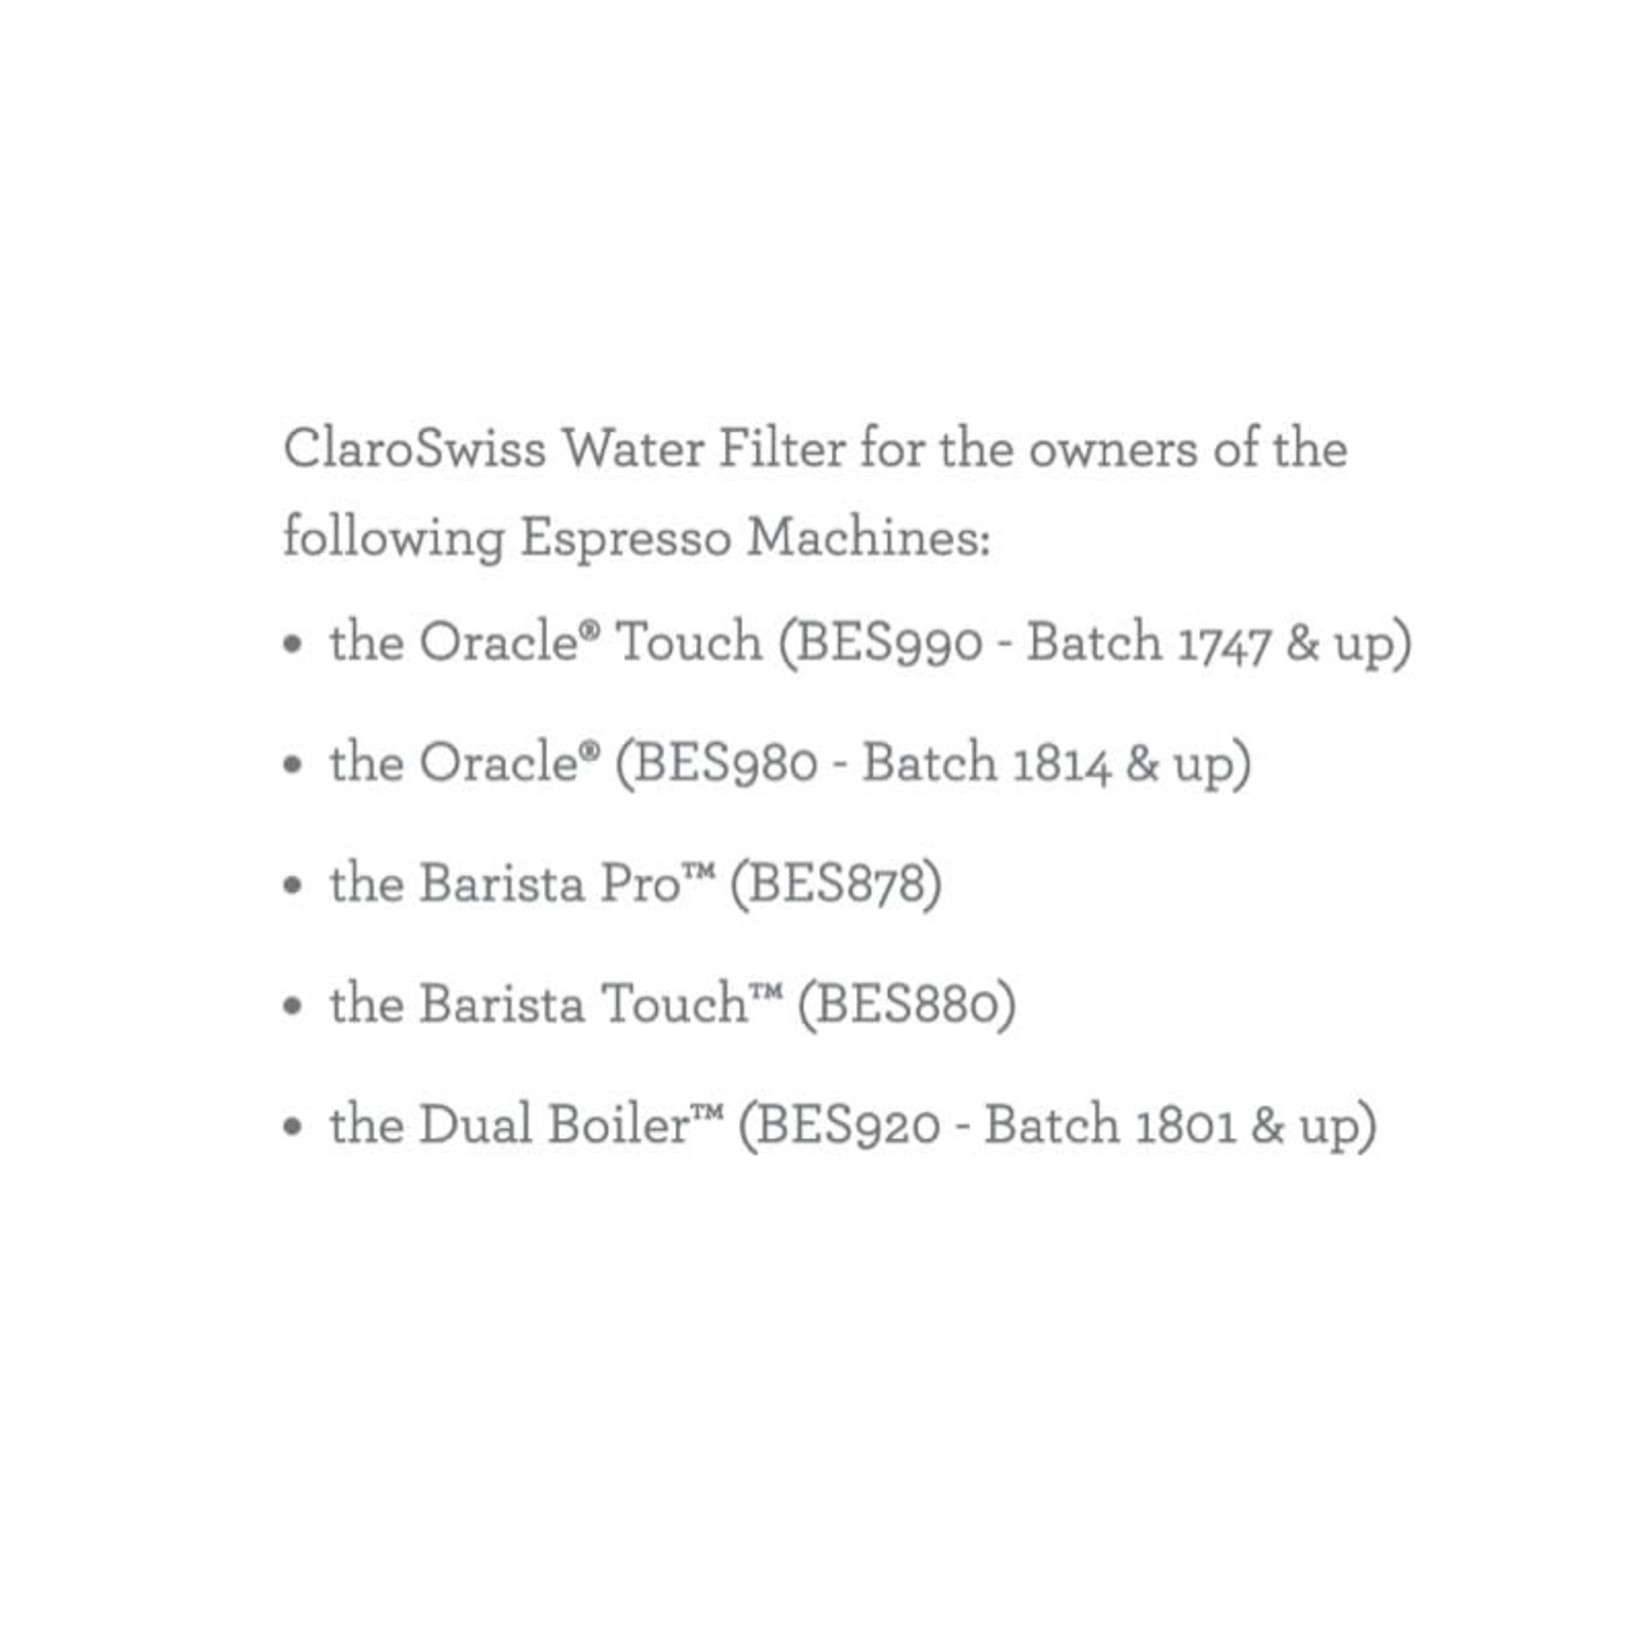 BREVILLE ClaroSwiss Water Filter